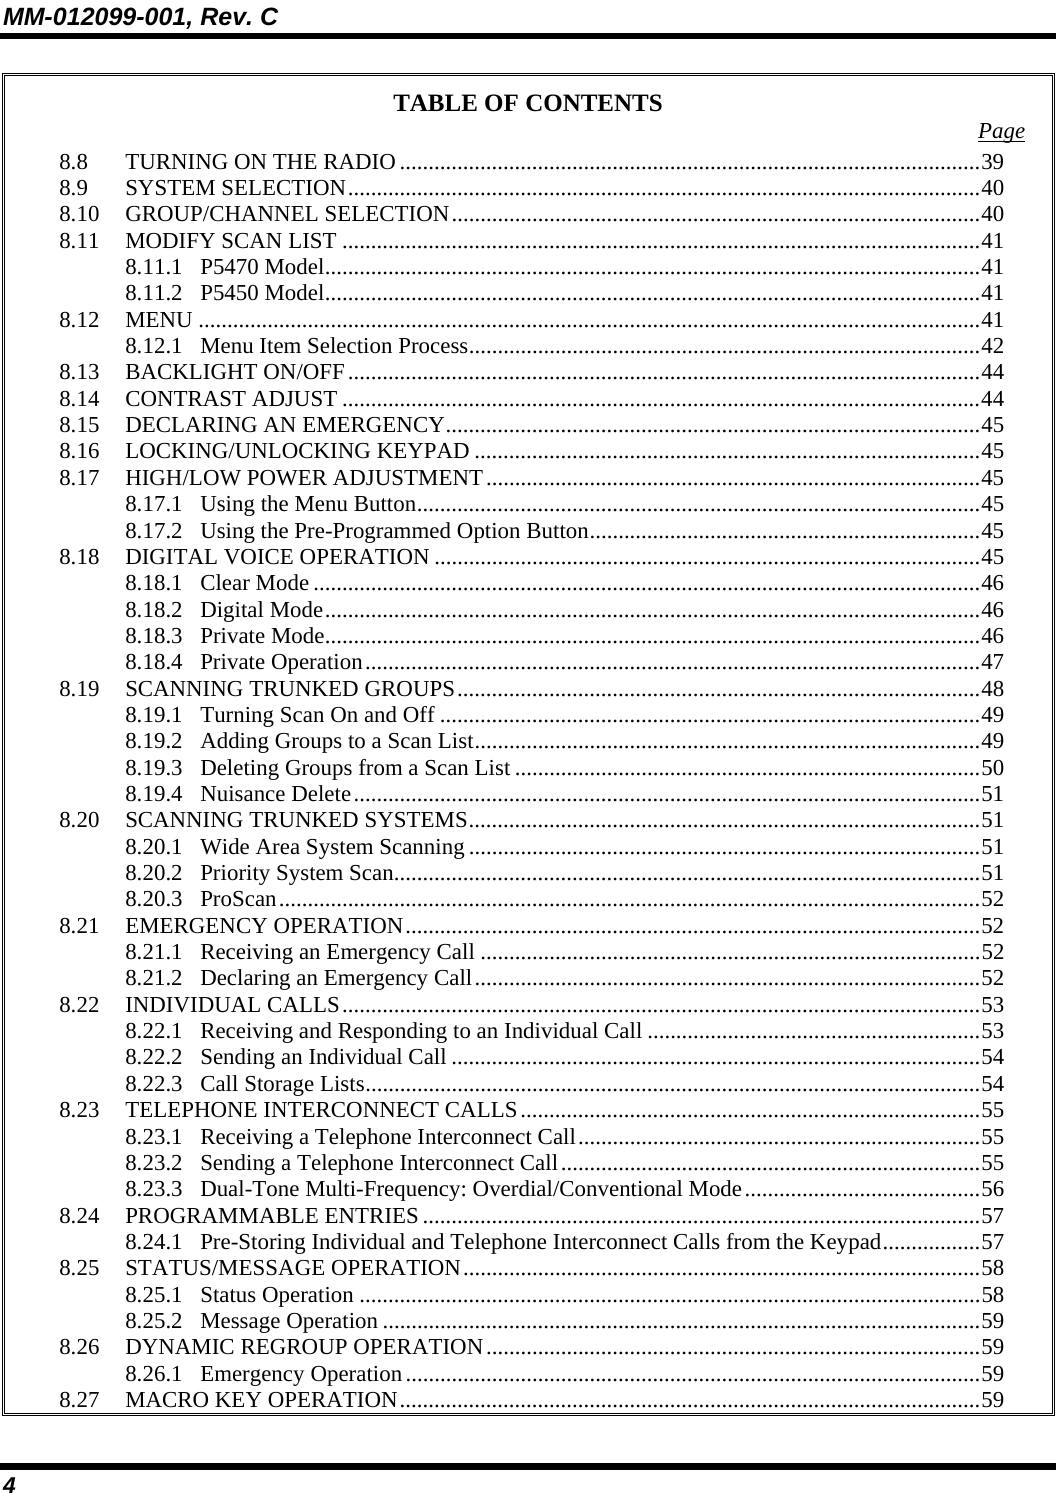 MM-012099-001, Rev. C 4 TABLE OF CONTENTS  Page 8.8 TURNING ON THE RADIO .....................................................................................................39 8.9 SYSTEM SELECTION..............................................................................................................40 8.10 GROUP/CHANNEL SELECTION............................................................................................40 8.11 MODIFY SCAN LIST ...............................................................................................................41 8.11.1 P5470 Model..................................................................................................................41 8.11.2 P5450 Model..................................................................................................................41 8.12 MENU ........................................................................................................................................41 8.12.1 Menu Item Selection Process.........................................................................................42 8.13 BACKLIGHT ON/OFF..............................................................................................................44 8.14 CONTRAST ADJUST ...............................................................................................................44 8.15 DECLARING AN EMERGENCY.............................................................................................45 8.16 LOCKING/UNLOCKING KEYPAD ........................................................................................45 8.17 HIGH/LOW POWER ADJUSTMENT......................................................................................45 8.17.1 Using the Menu Button..................................................................................................45 8.17.2 Using the Pre-Programmed Option Button....................................................................45 8.18 DIGITAL VOICE OPERATION ...............................................................................................45 8.18.1 Clear Mode ....................................................................................................................46 8.18.2 Digital Mode..................................................................................................................46 8.18.3 Private Mode..................................................................................................................46 8.18.4 Private Operation...........................................................................................................47 8.19 SCANNING TRUNKED GROUPS...........................................................................................48 8.19.1 Turning Scan On and Off ..............................................................................................49 8.19.2 Adding Groups to a Scan List........................................................................................49 8.19.3 Deleting Groups from a Scan List .................................................................................50 8.19.4 Nuisance Delete.............................................................................................................51 8.20 SCANNING TRUNKED SYSTEMS.........................................................................................51 8.20.1 Wide Area System Scanning .........................................................................................51 8.20.2 Priority System Scan......................................................................................................51 8.20.3 ProScan..........................................................................................................................52 8.21 EMERGENCY OPERATION....................................................................................................52 8.21.1 Receiving an Emergency Call .......................................................................................52 8.21.2 Declaring an Emergency Call........................................................................................52 8.22 INDIVIDUAL CALLS...............................................................................................................53 8.22.1 Receiving and Responding to an Individual Call ..........................................................53 8.22.2 Sending an Individual Call ............................................................................................54 8.22.3 Call Storage Lists...........................................................................................................54 8.23 TELEPHONE INTERCONNECT CALLS................................................................................55 8.23.1 Receiving a Telephone Interconnect Call......................................................................55 8.23.2 Sending a Telephone Interconnect Call.........................................................................55 8.23.3 Dual-Tone Multi-Frequency: Overdial/Conventional Mode.........................................56 8.24 PROGRAMMABLE ENTRIES .................................................................................................57 8.24.1 Pre-Storing Individual and Telephone Interconnect Calls from the Keypad.................57 8.25 STATUS/MESSAGE OPERATION..........................................................................................58 8.25.1 Status Operation ............................................................................................................58 8.25.2 Message Operation ........................................................................................................59 8.26 DYNAMIC REGROUP OPERATION......................................................................................59 8.26.1 Emergency Operation....................................................................................................59 8.27 MACRO KEY OPERATION.....................................................................................................59 